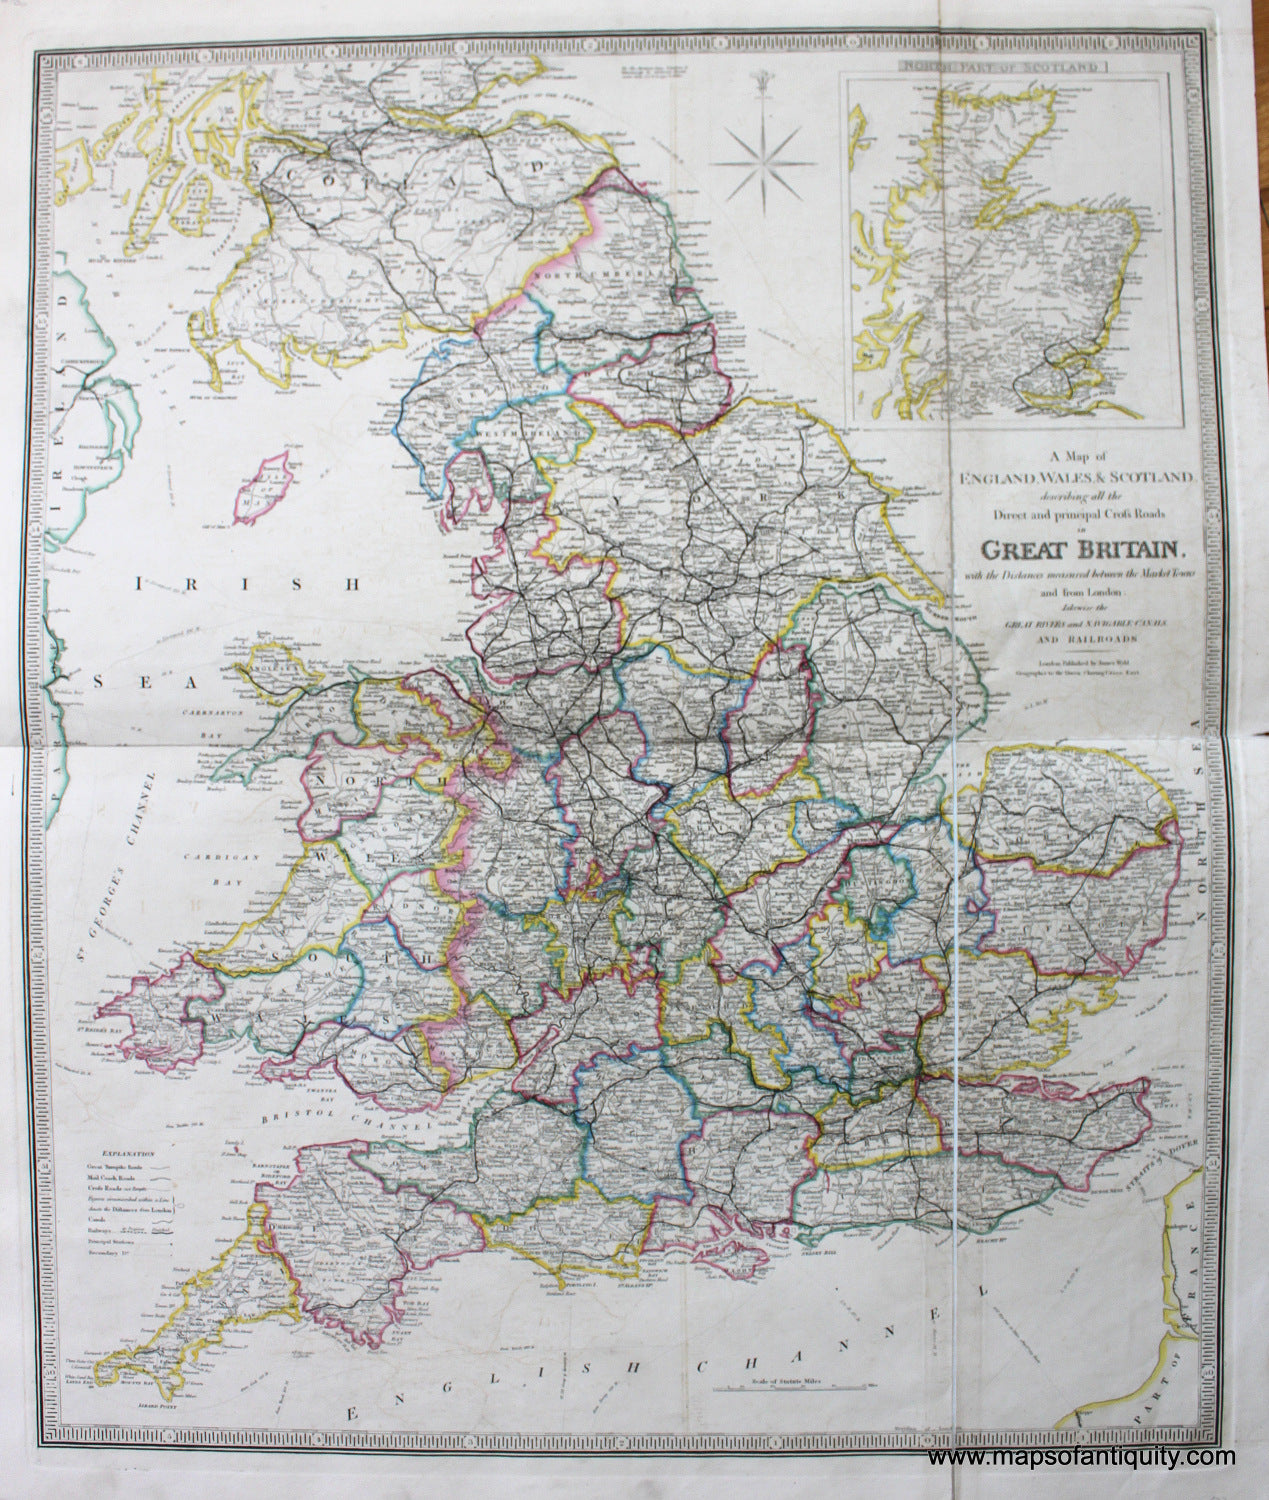 Antique-Hand-Colored-Map-A-Map-of-England-Wales-&-Scotland-describing-all-the-Direct-and-principal-Cross-Roads-in-Great-Britain-with-the-Distances-measured-between-the-Market-Towns-and-from-London;-Likewise-the-Great-Rivers-and-Navigable-Canals-and-Railroads.-******-Europe-England-1838-Wyld-Maps-Of-Antiquity